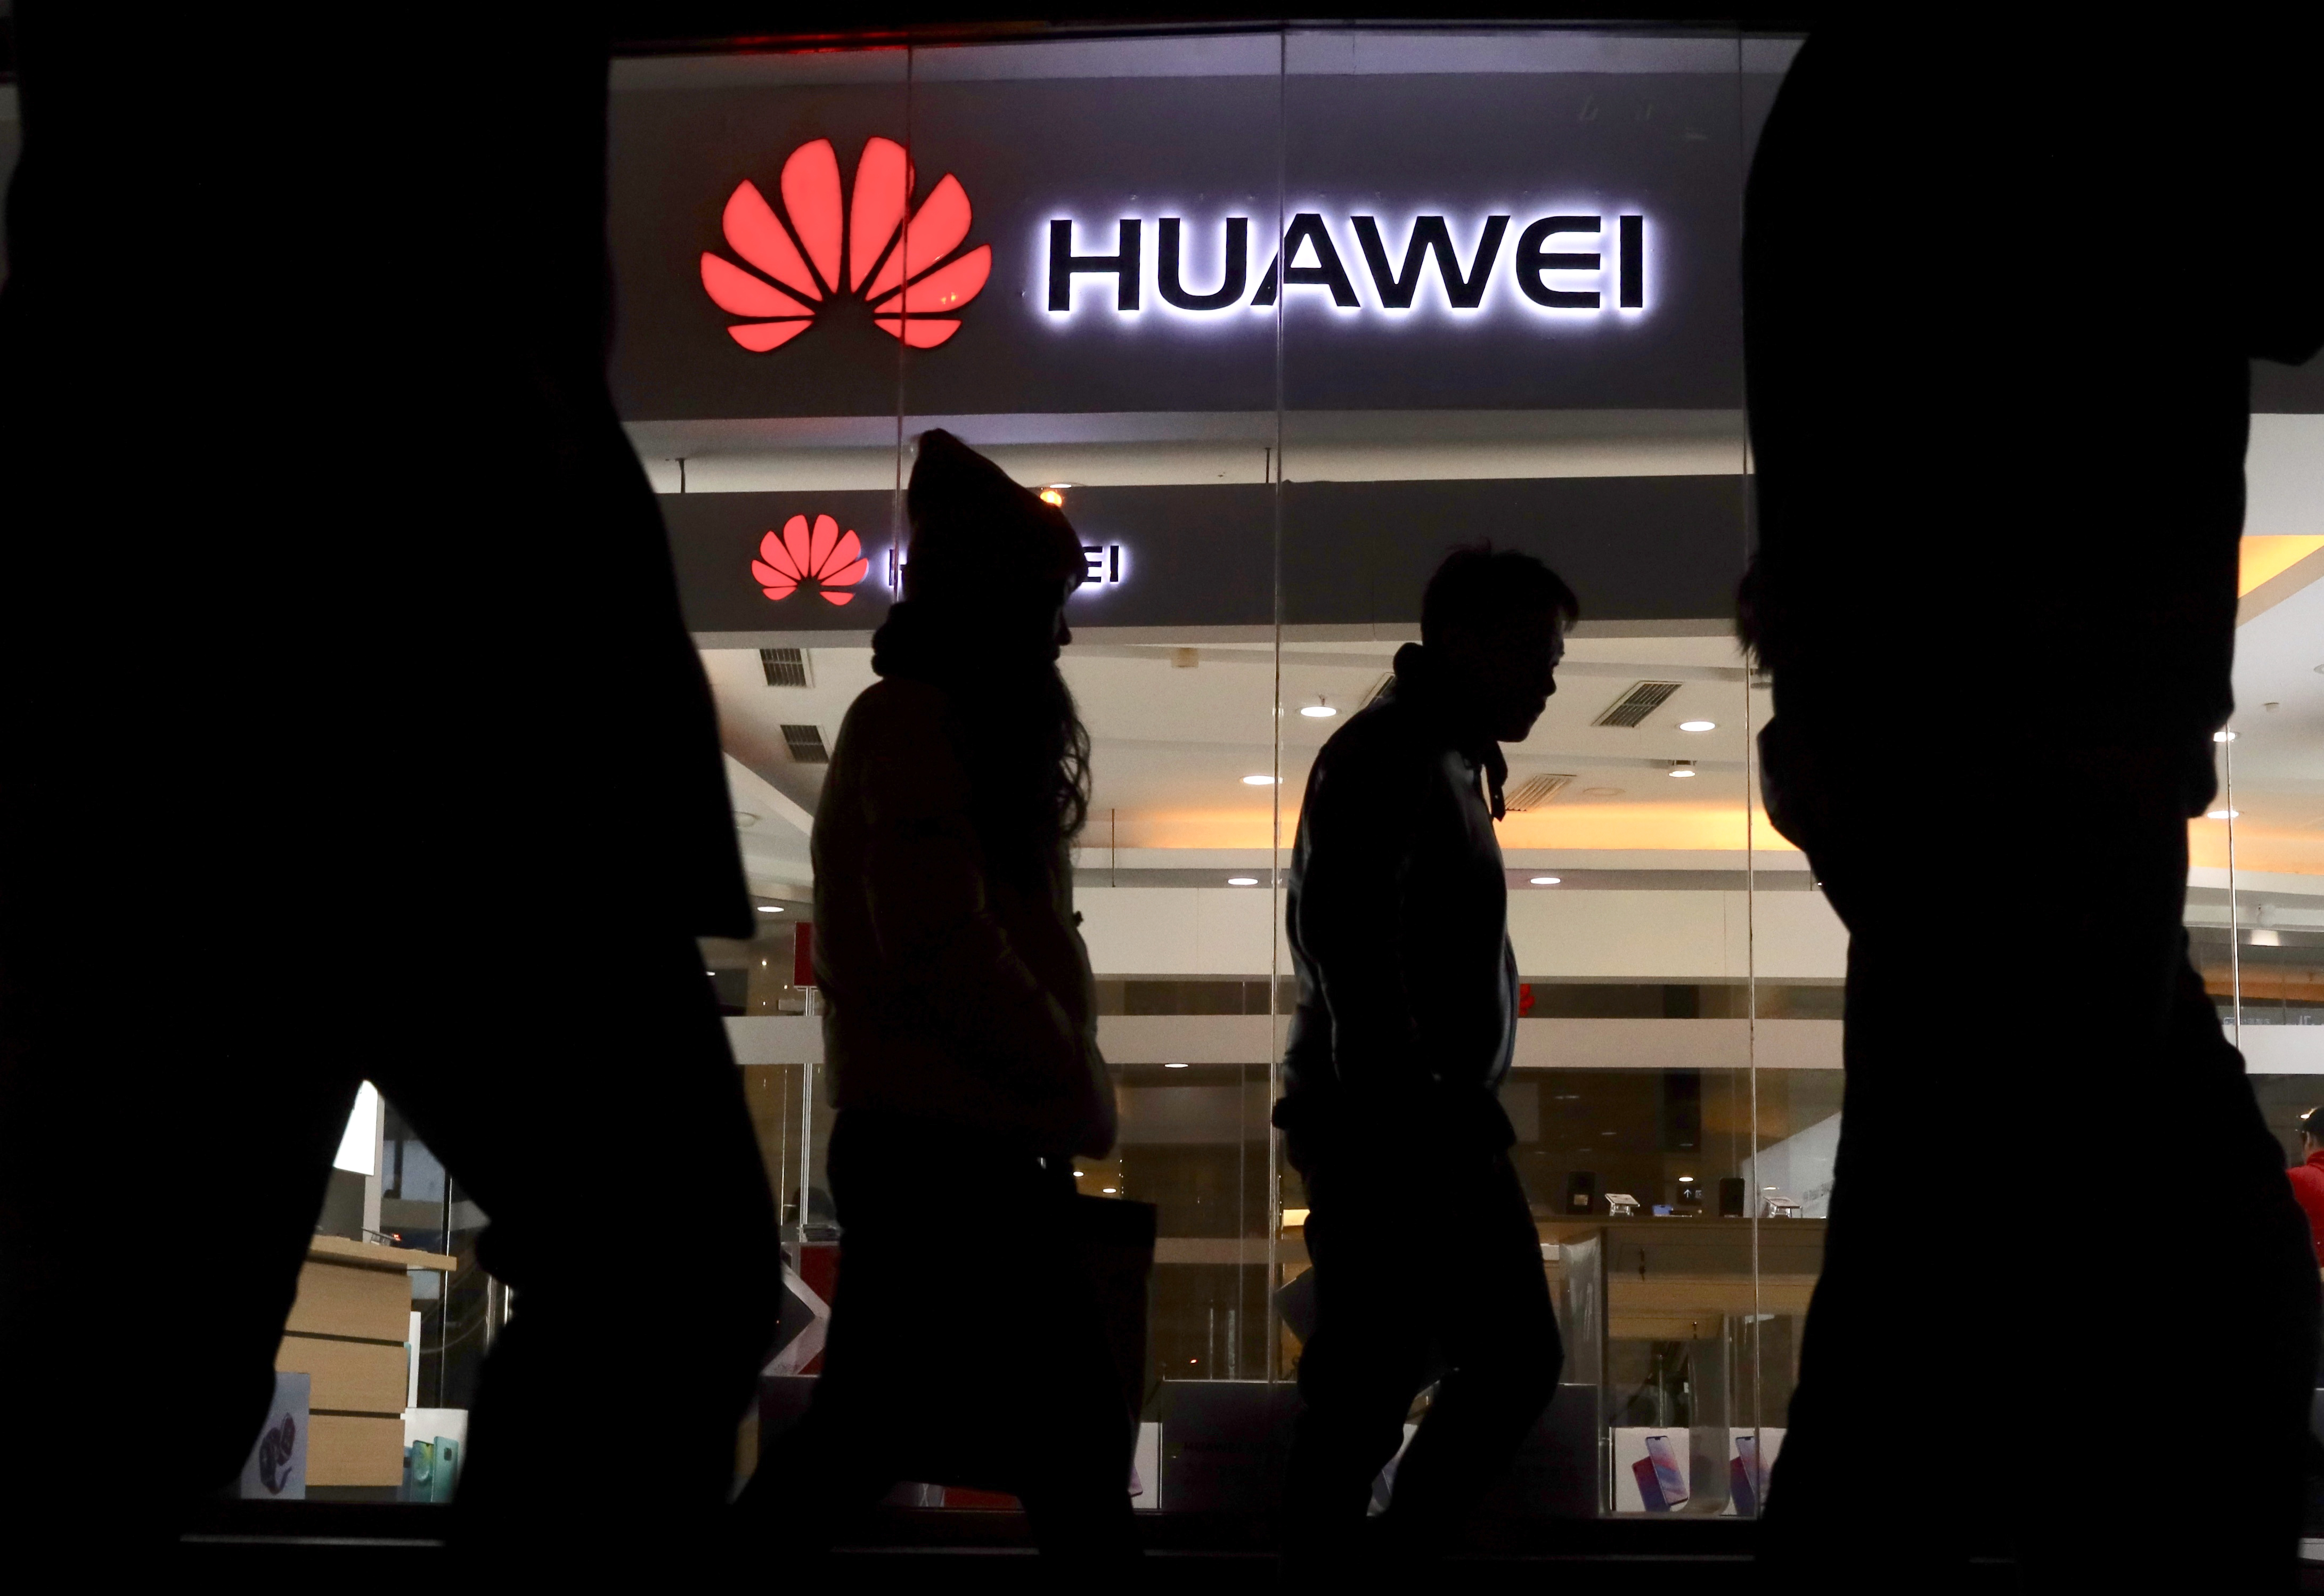 jammer nut key points , Executive’s Arrest, Security Worries Stymie Huawei’s Reach